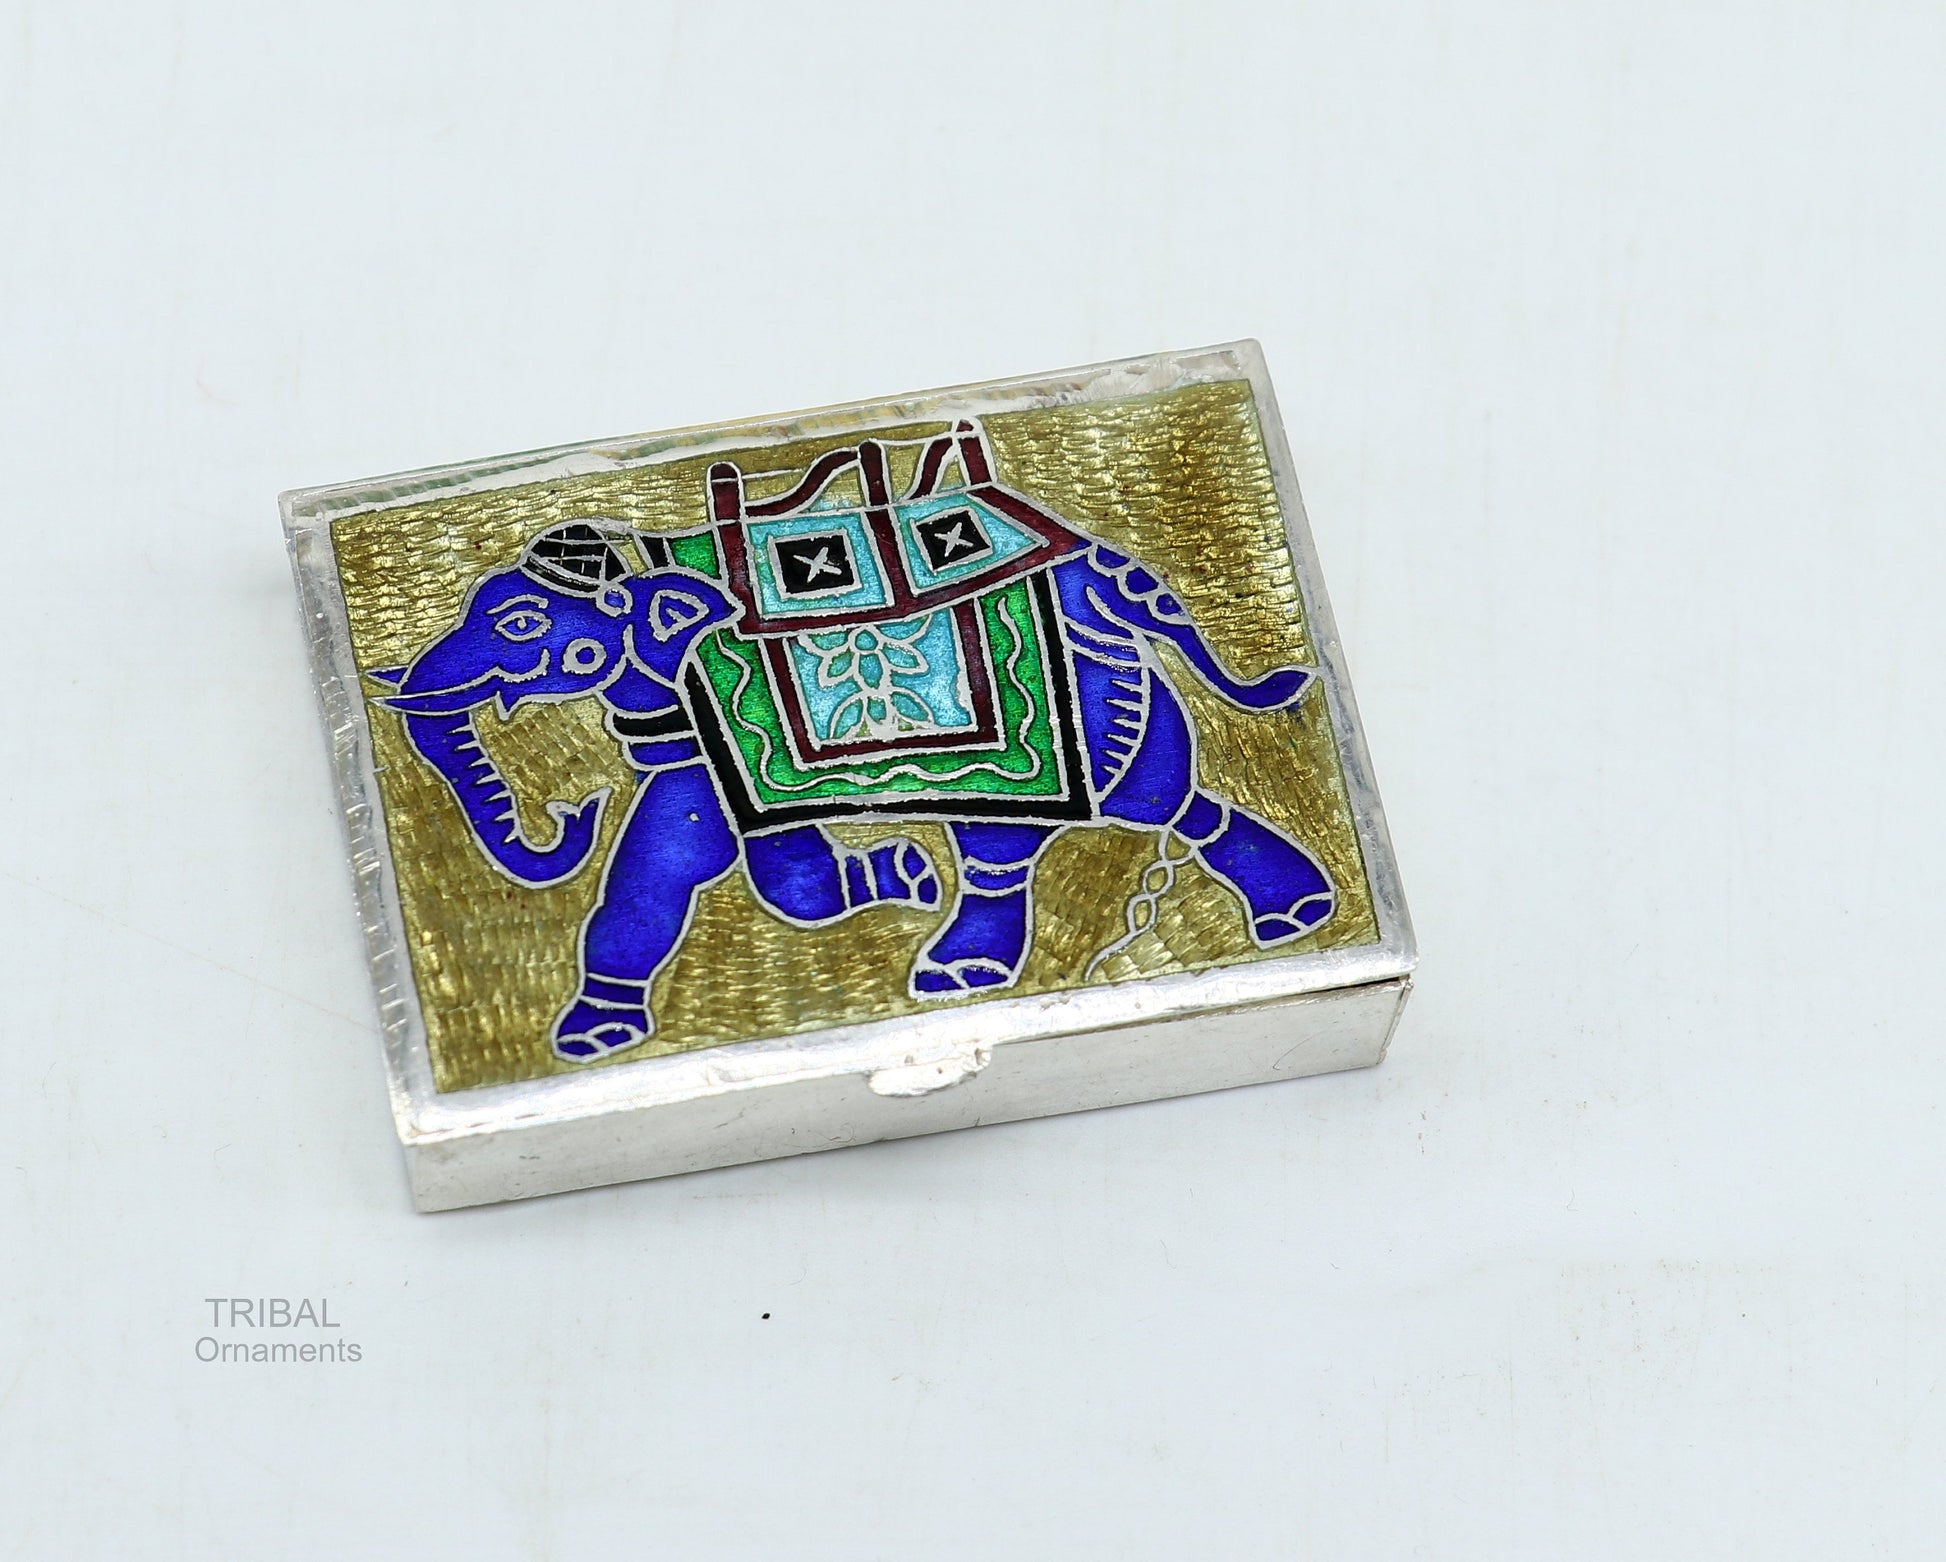 925 Sterling silver handmade trinket box, solid container box, casket box, sindoor box, enamel elephant work customized gifting box stb335 - TRIBAL ORNAMENTS